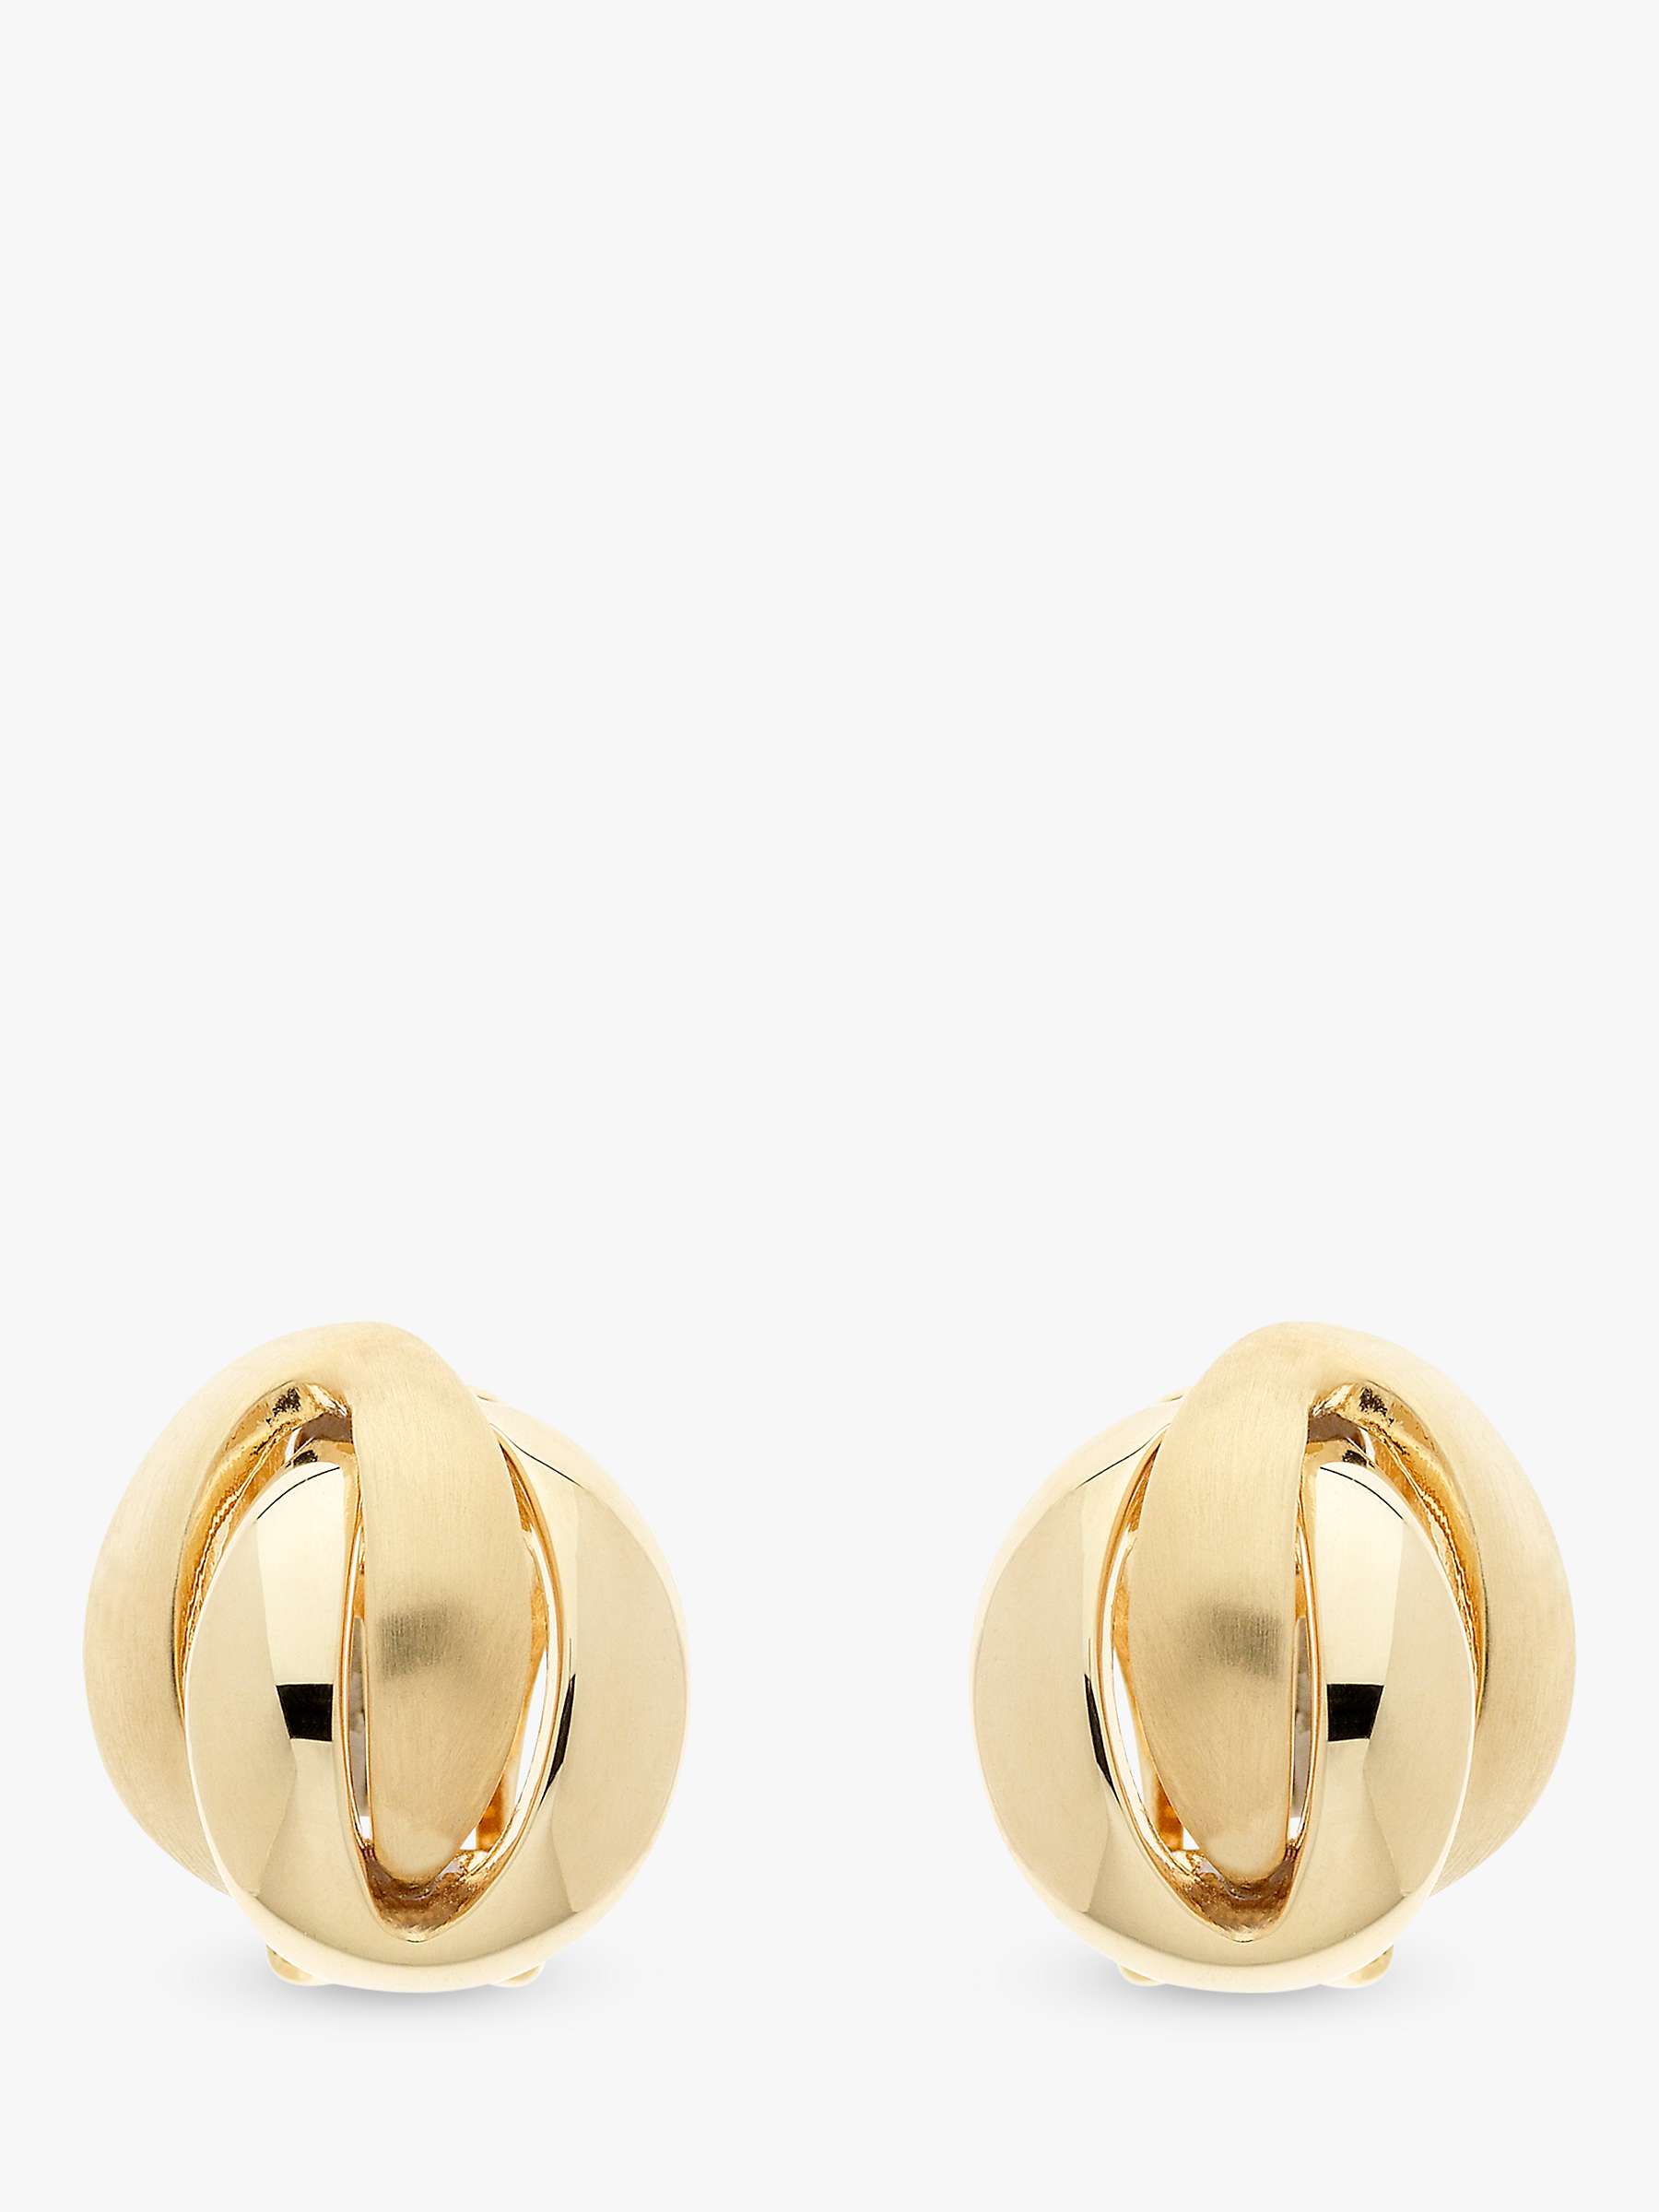 Buy Emma Holland Knot Clip-On Earrings, Gold Online at johnlewis.com